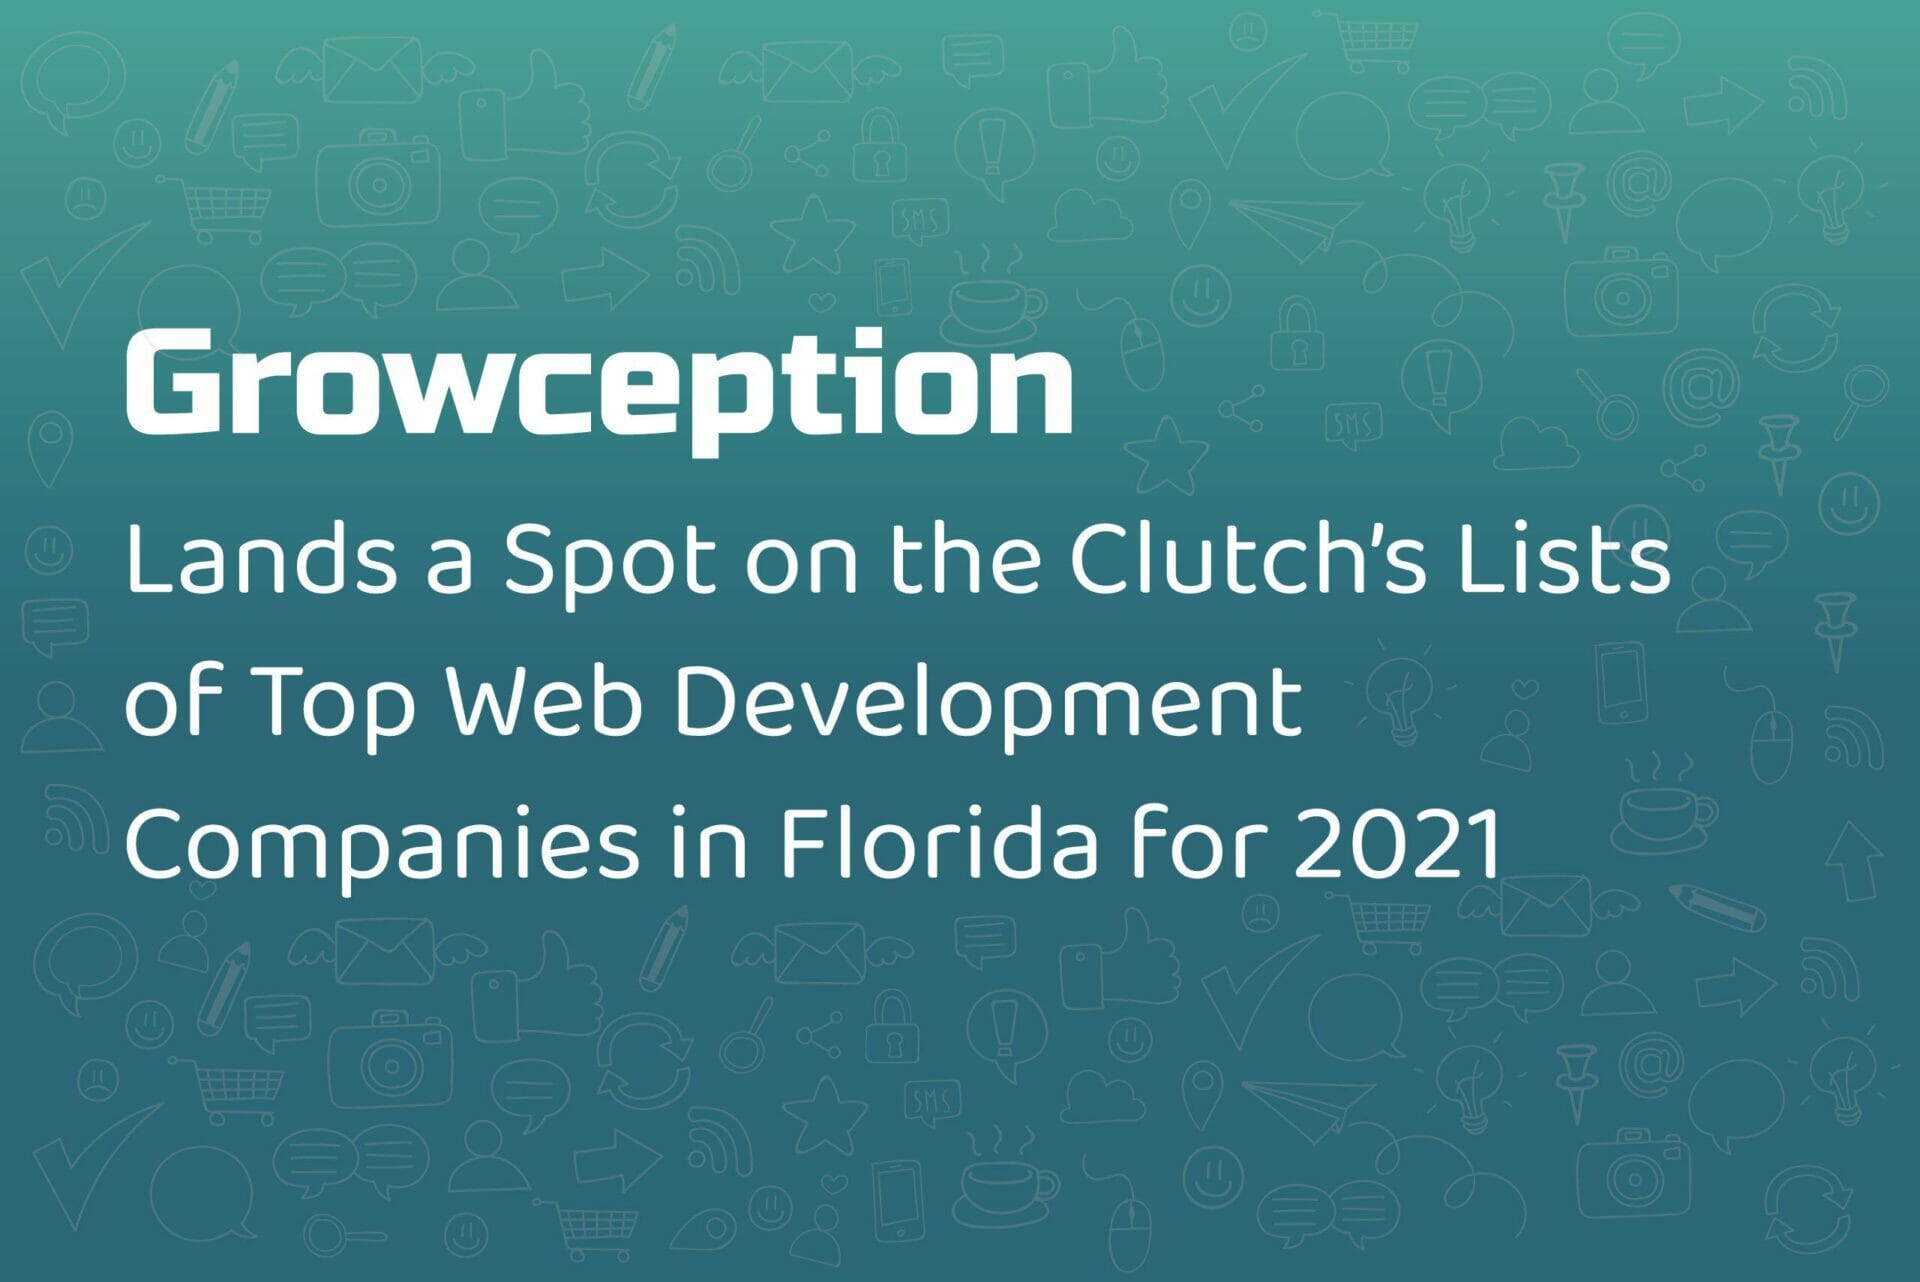 Growception Lands a Spot on the Clutch’s Lists of Top Web Development Companies in Florida for 2021